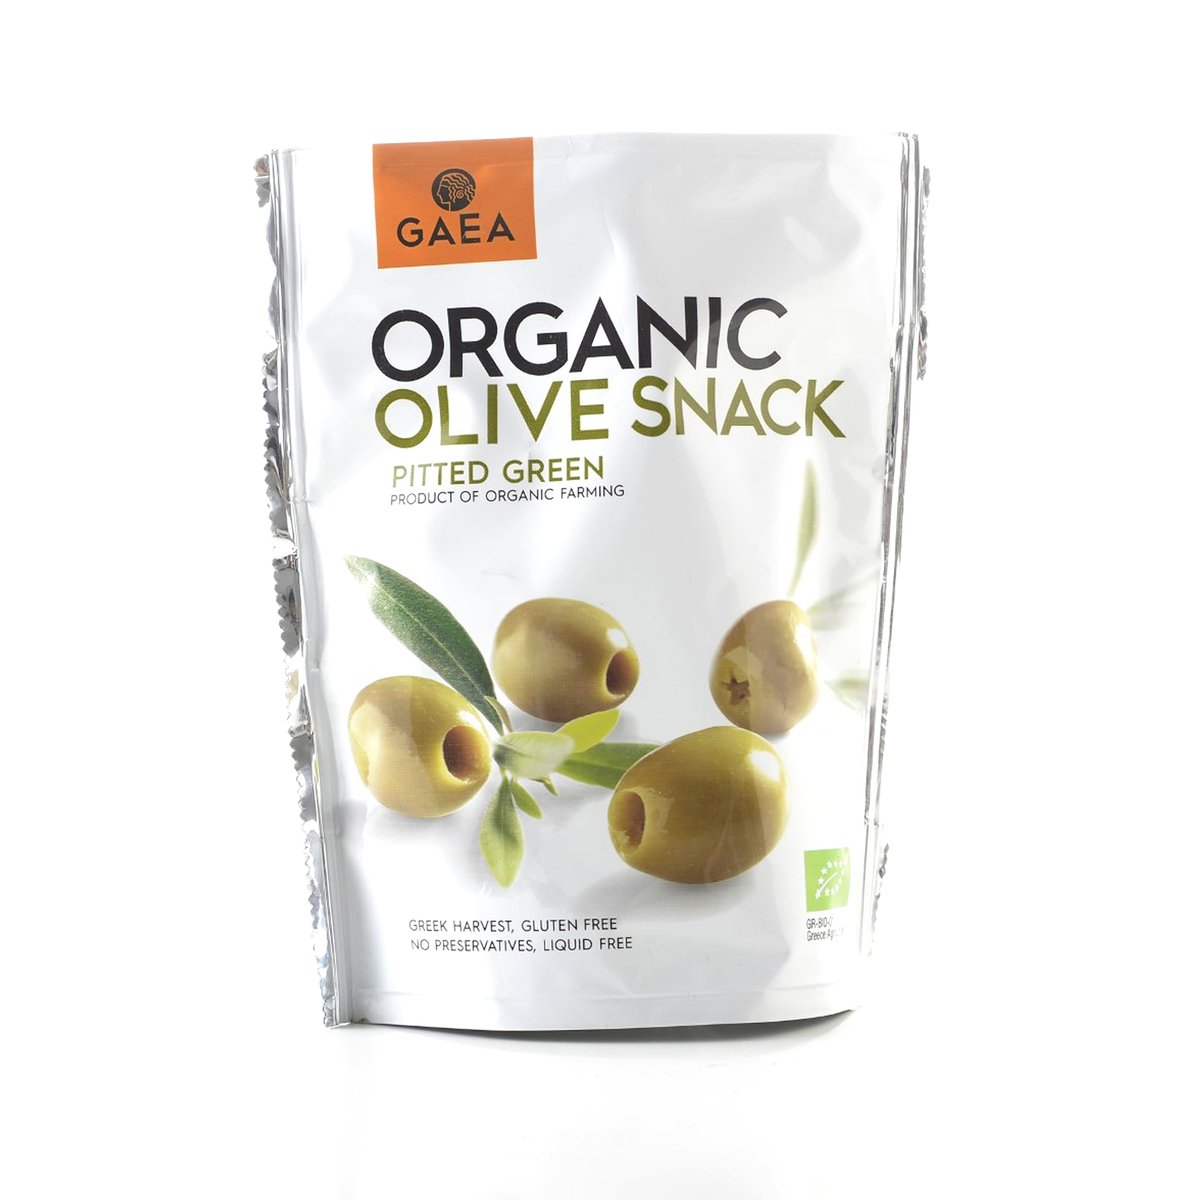 Gaea Organic Olive Snack Pitted Green 65g